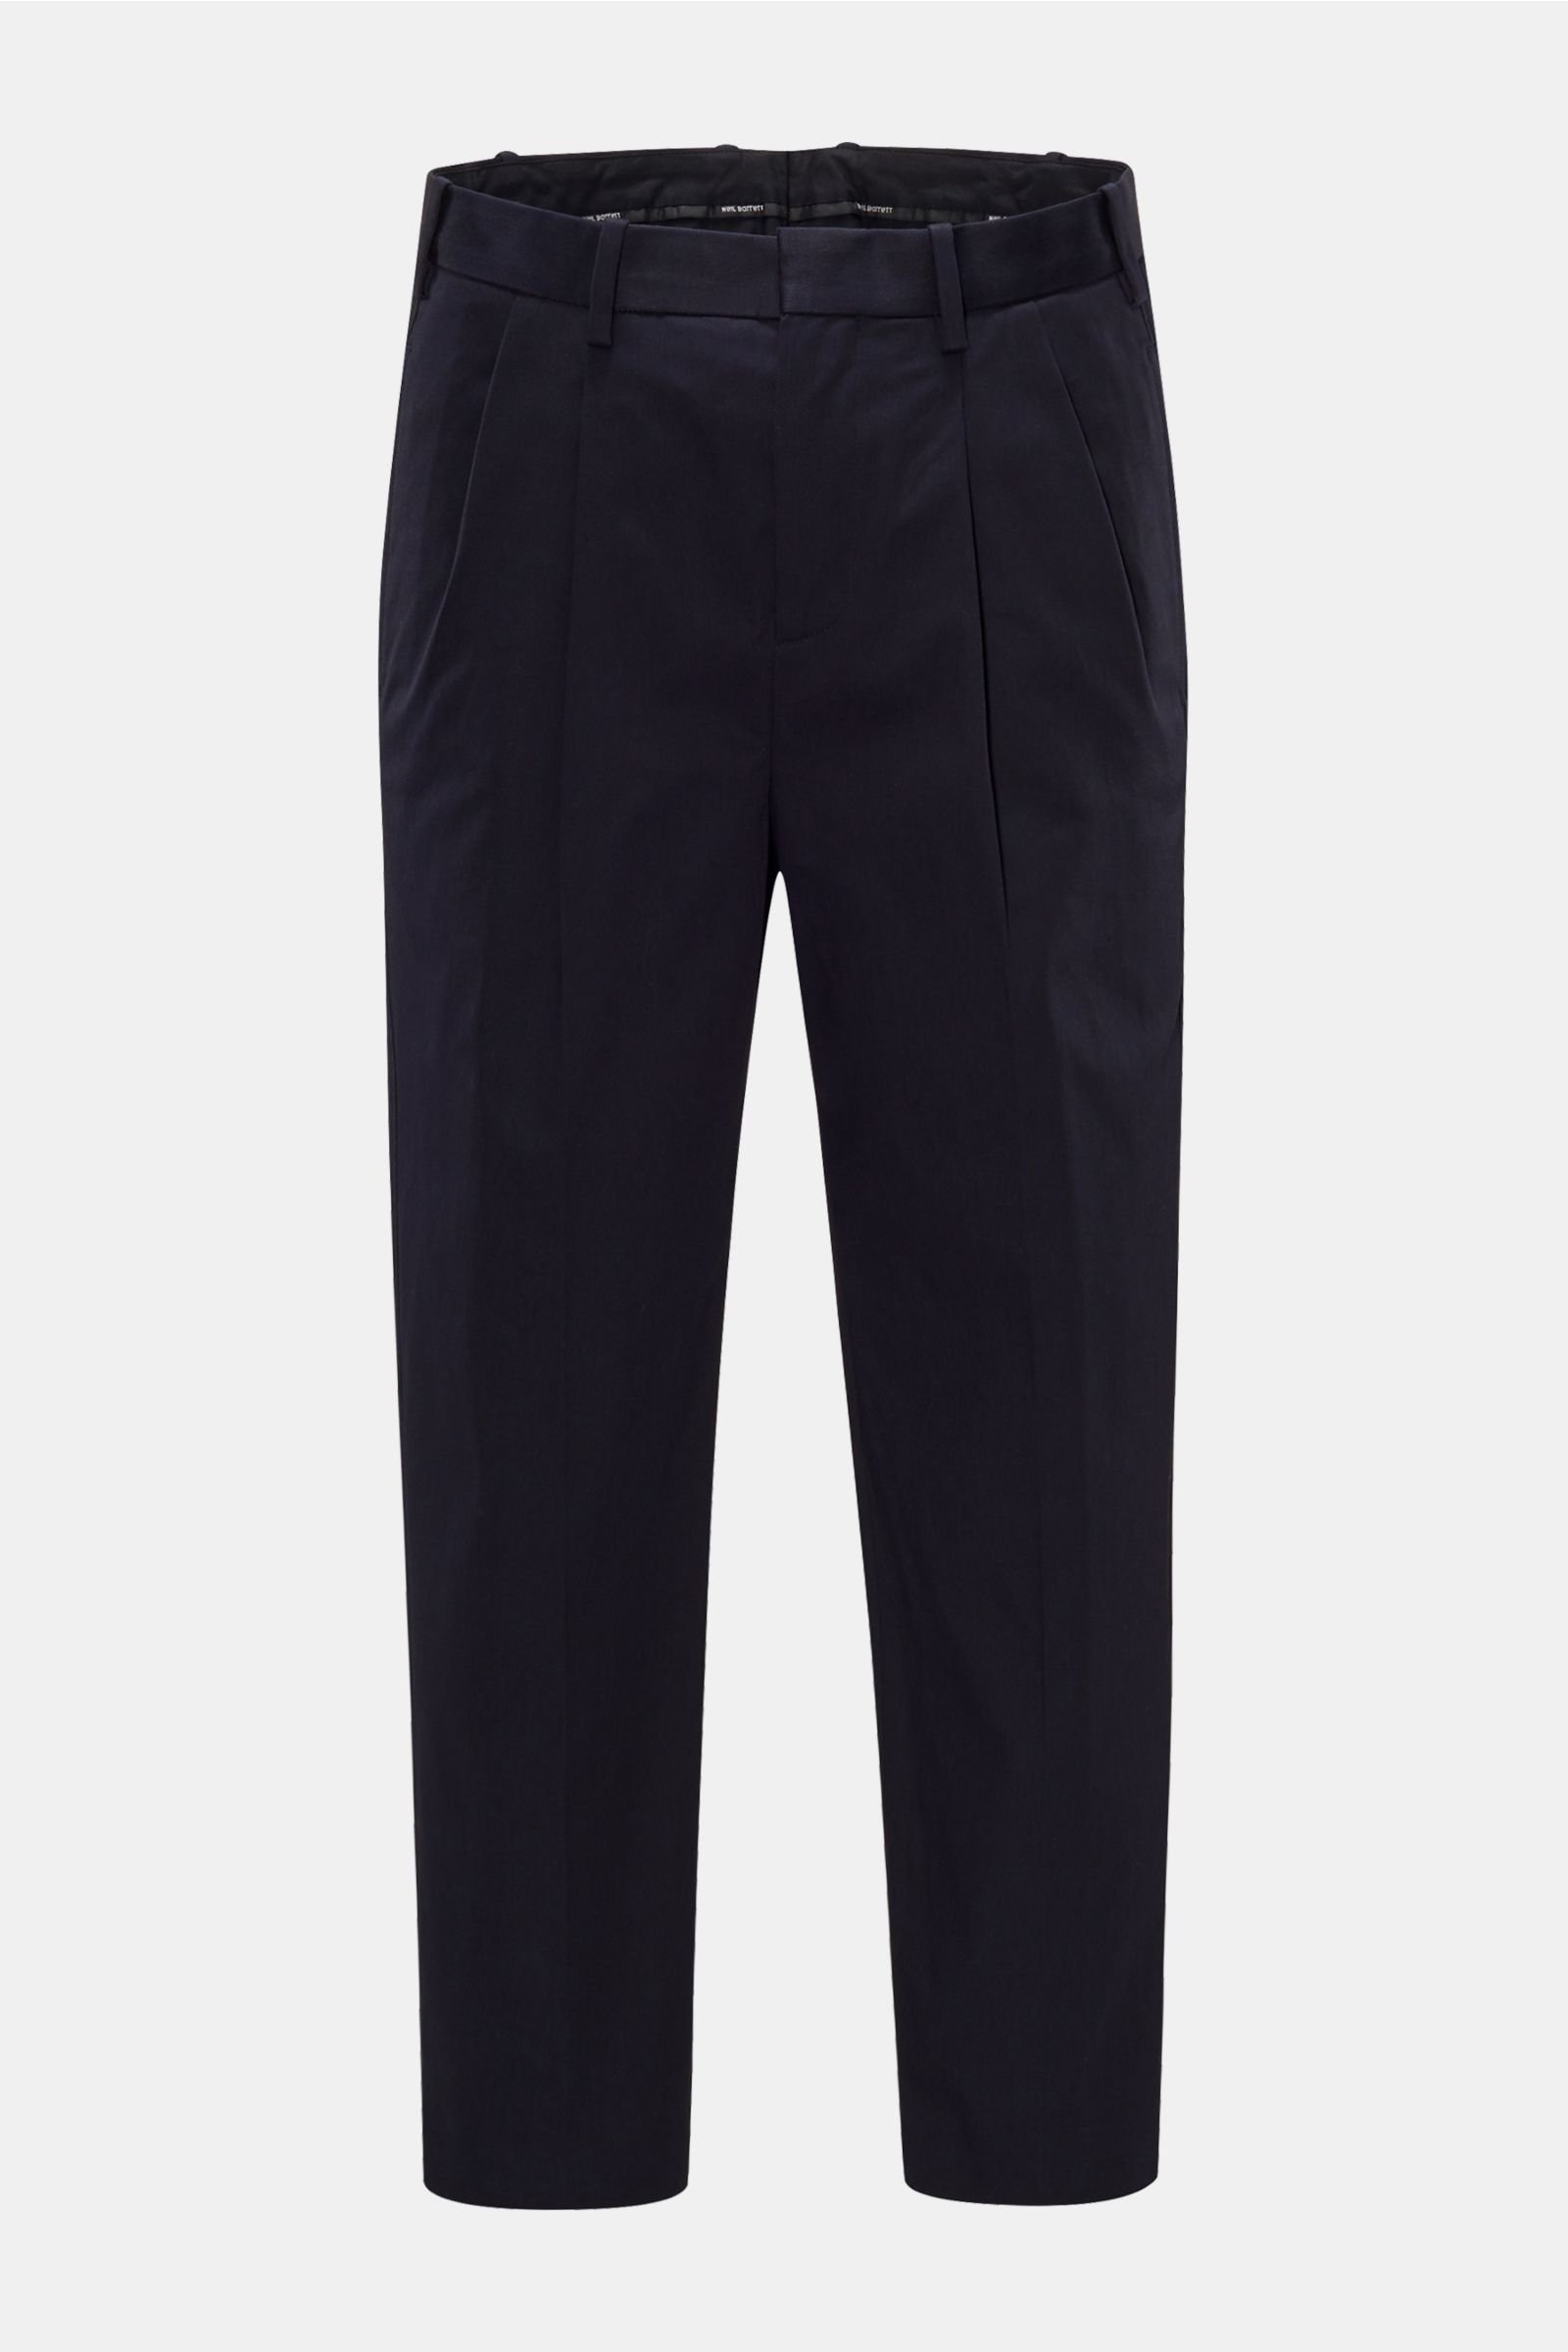 Cotton trousers navy